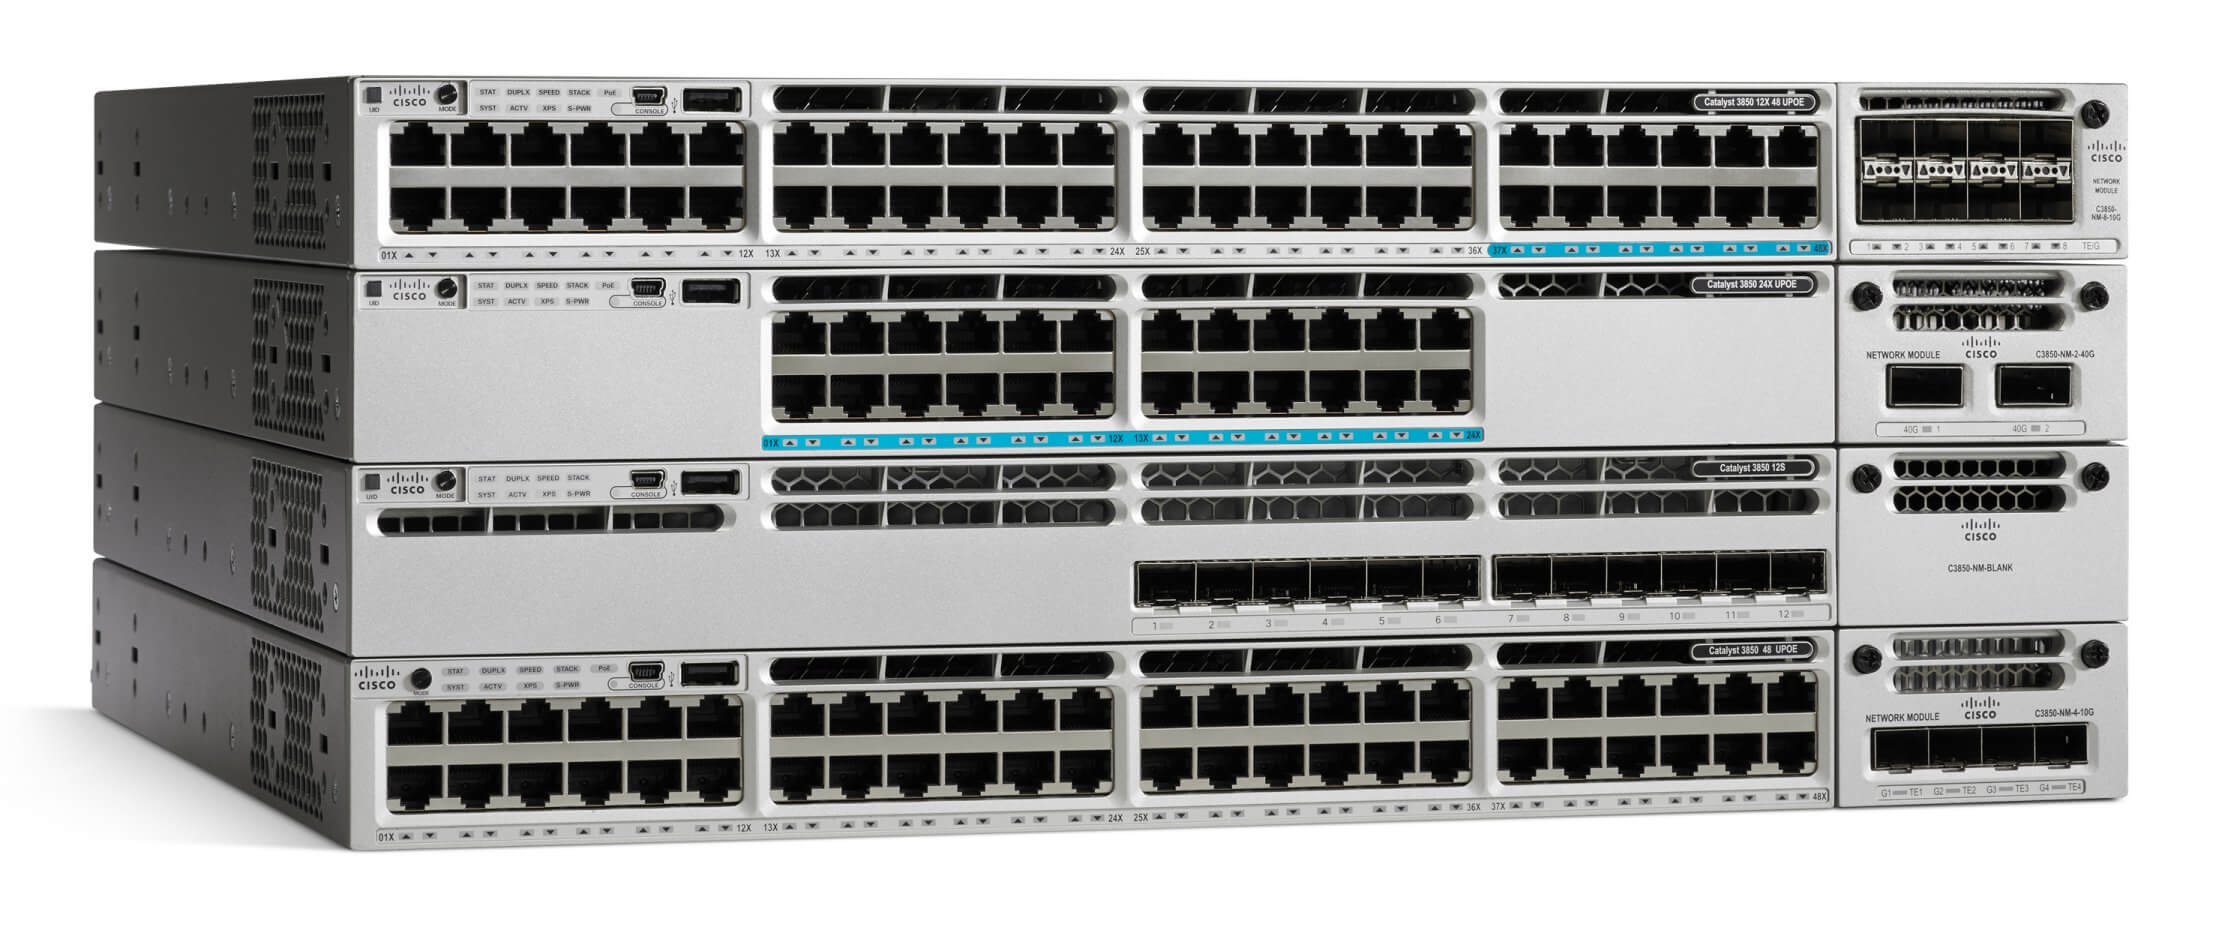 Product Image of Cisco Catalyst 3850 Series Switches